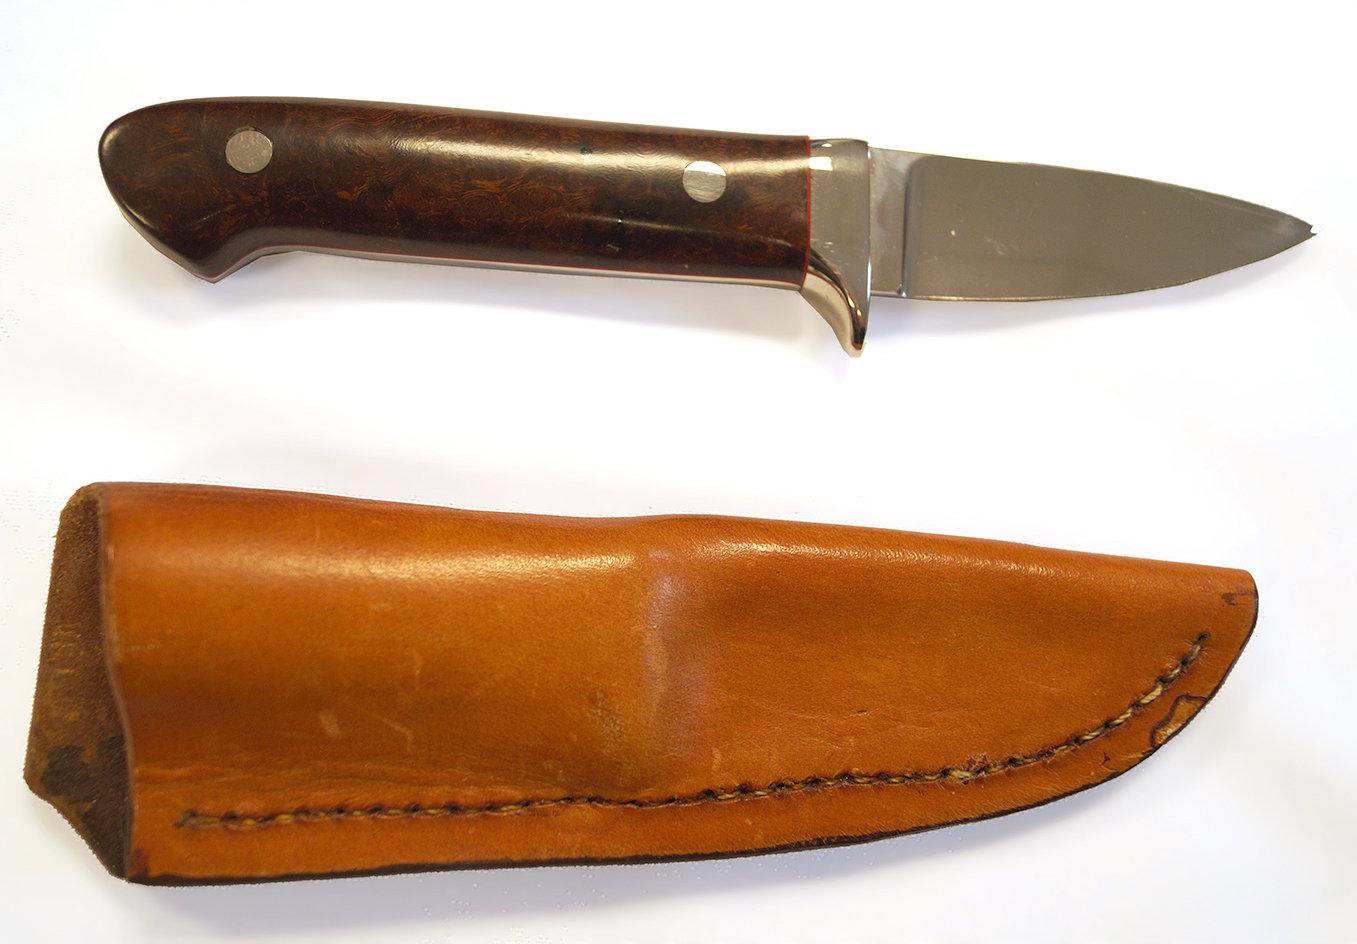 Knife made by Gary Smith Lynchburg, Ohio.  Blade is 3", overall is 7 1/2". Leather sheath included.